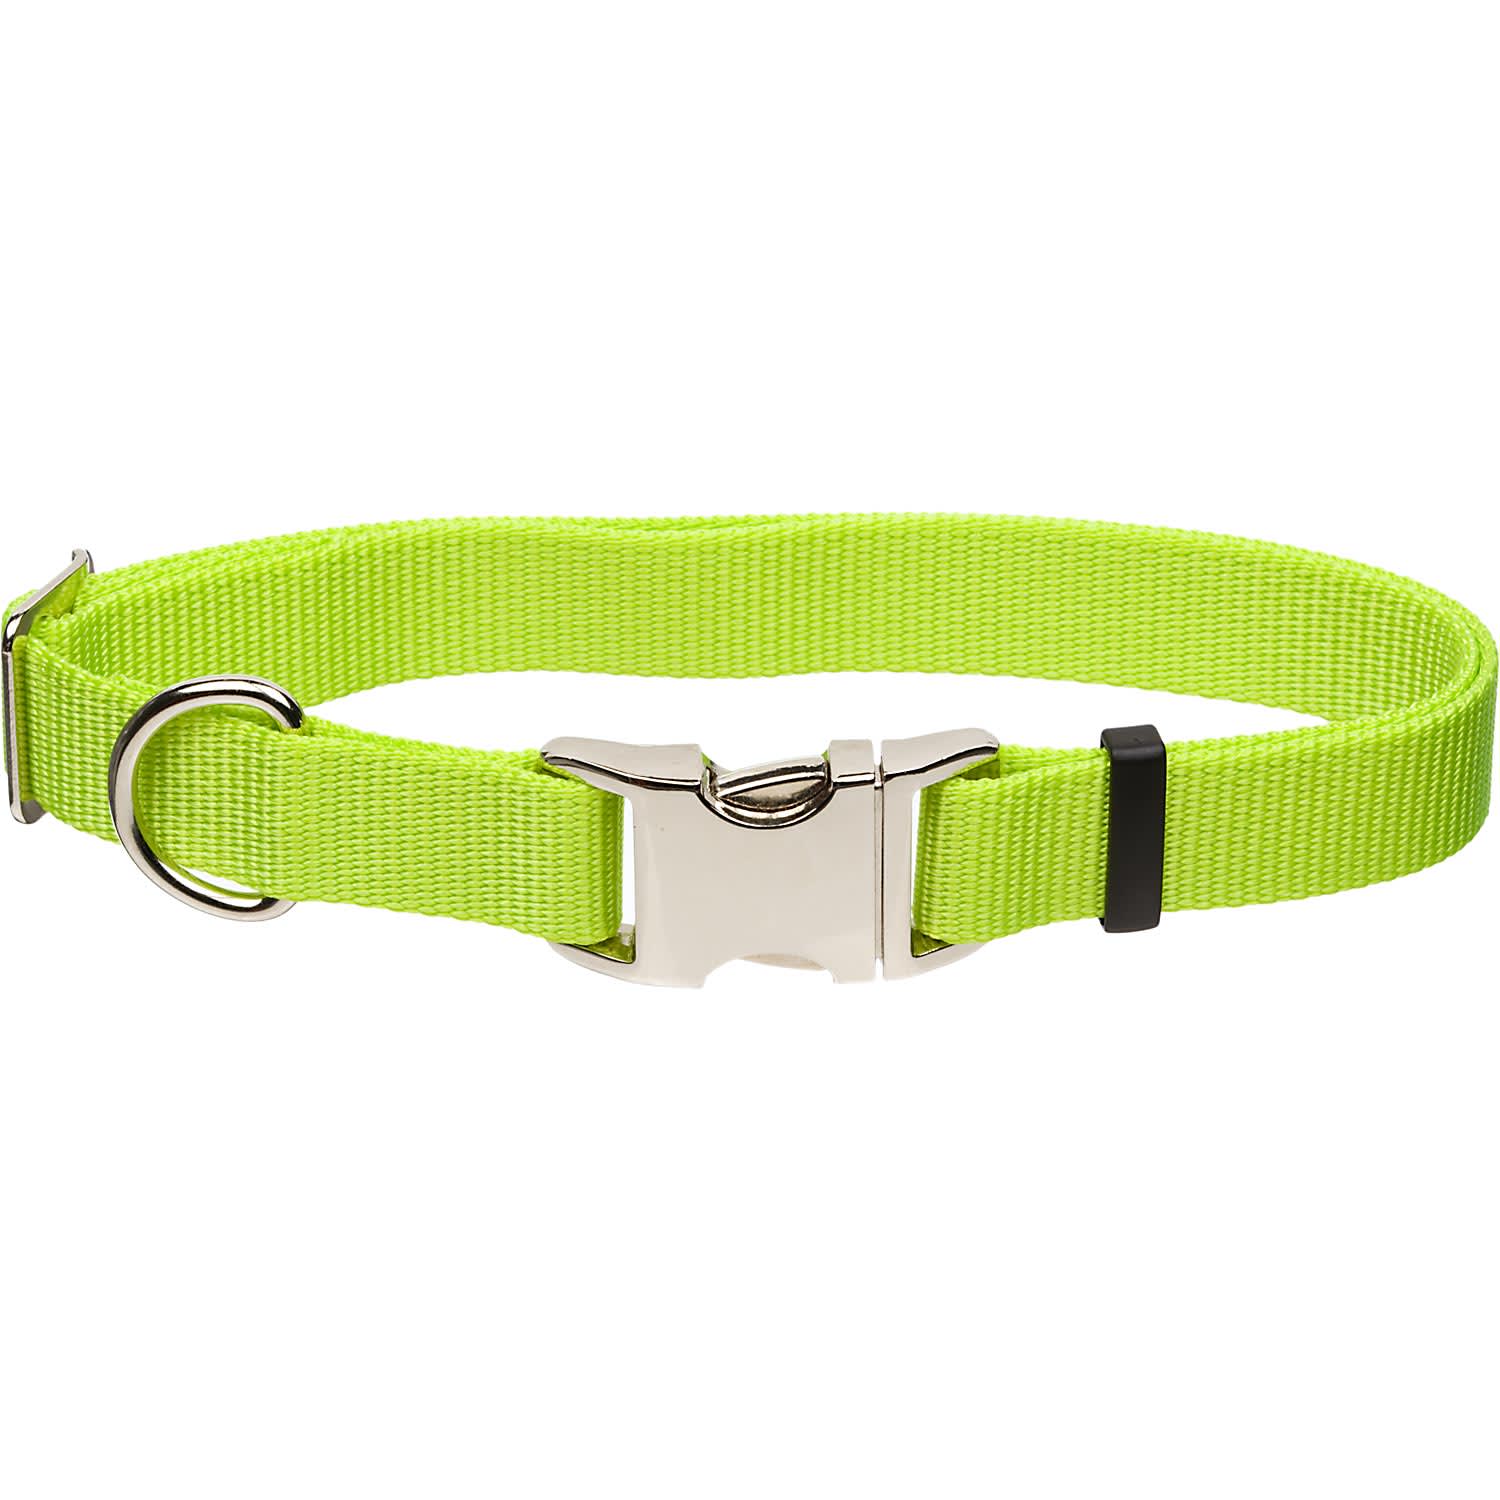 Coastal Pet Products Personalized Lime Adjustable Dog Collar with Metal Buckle